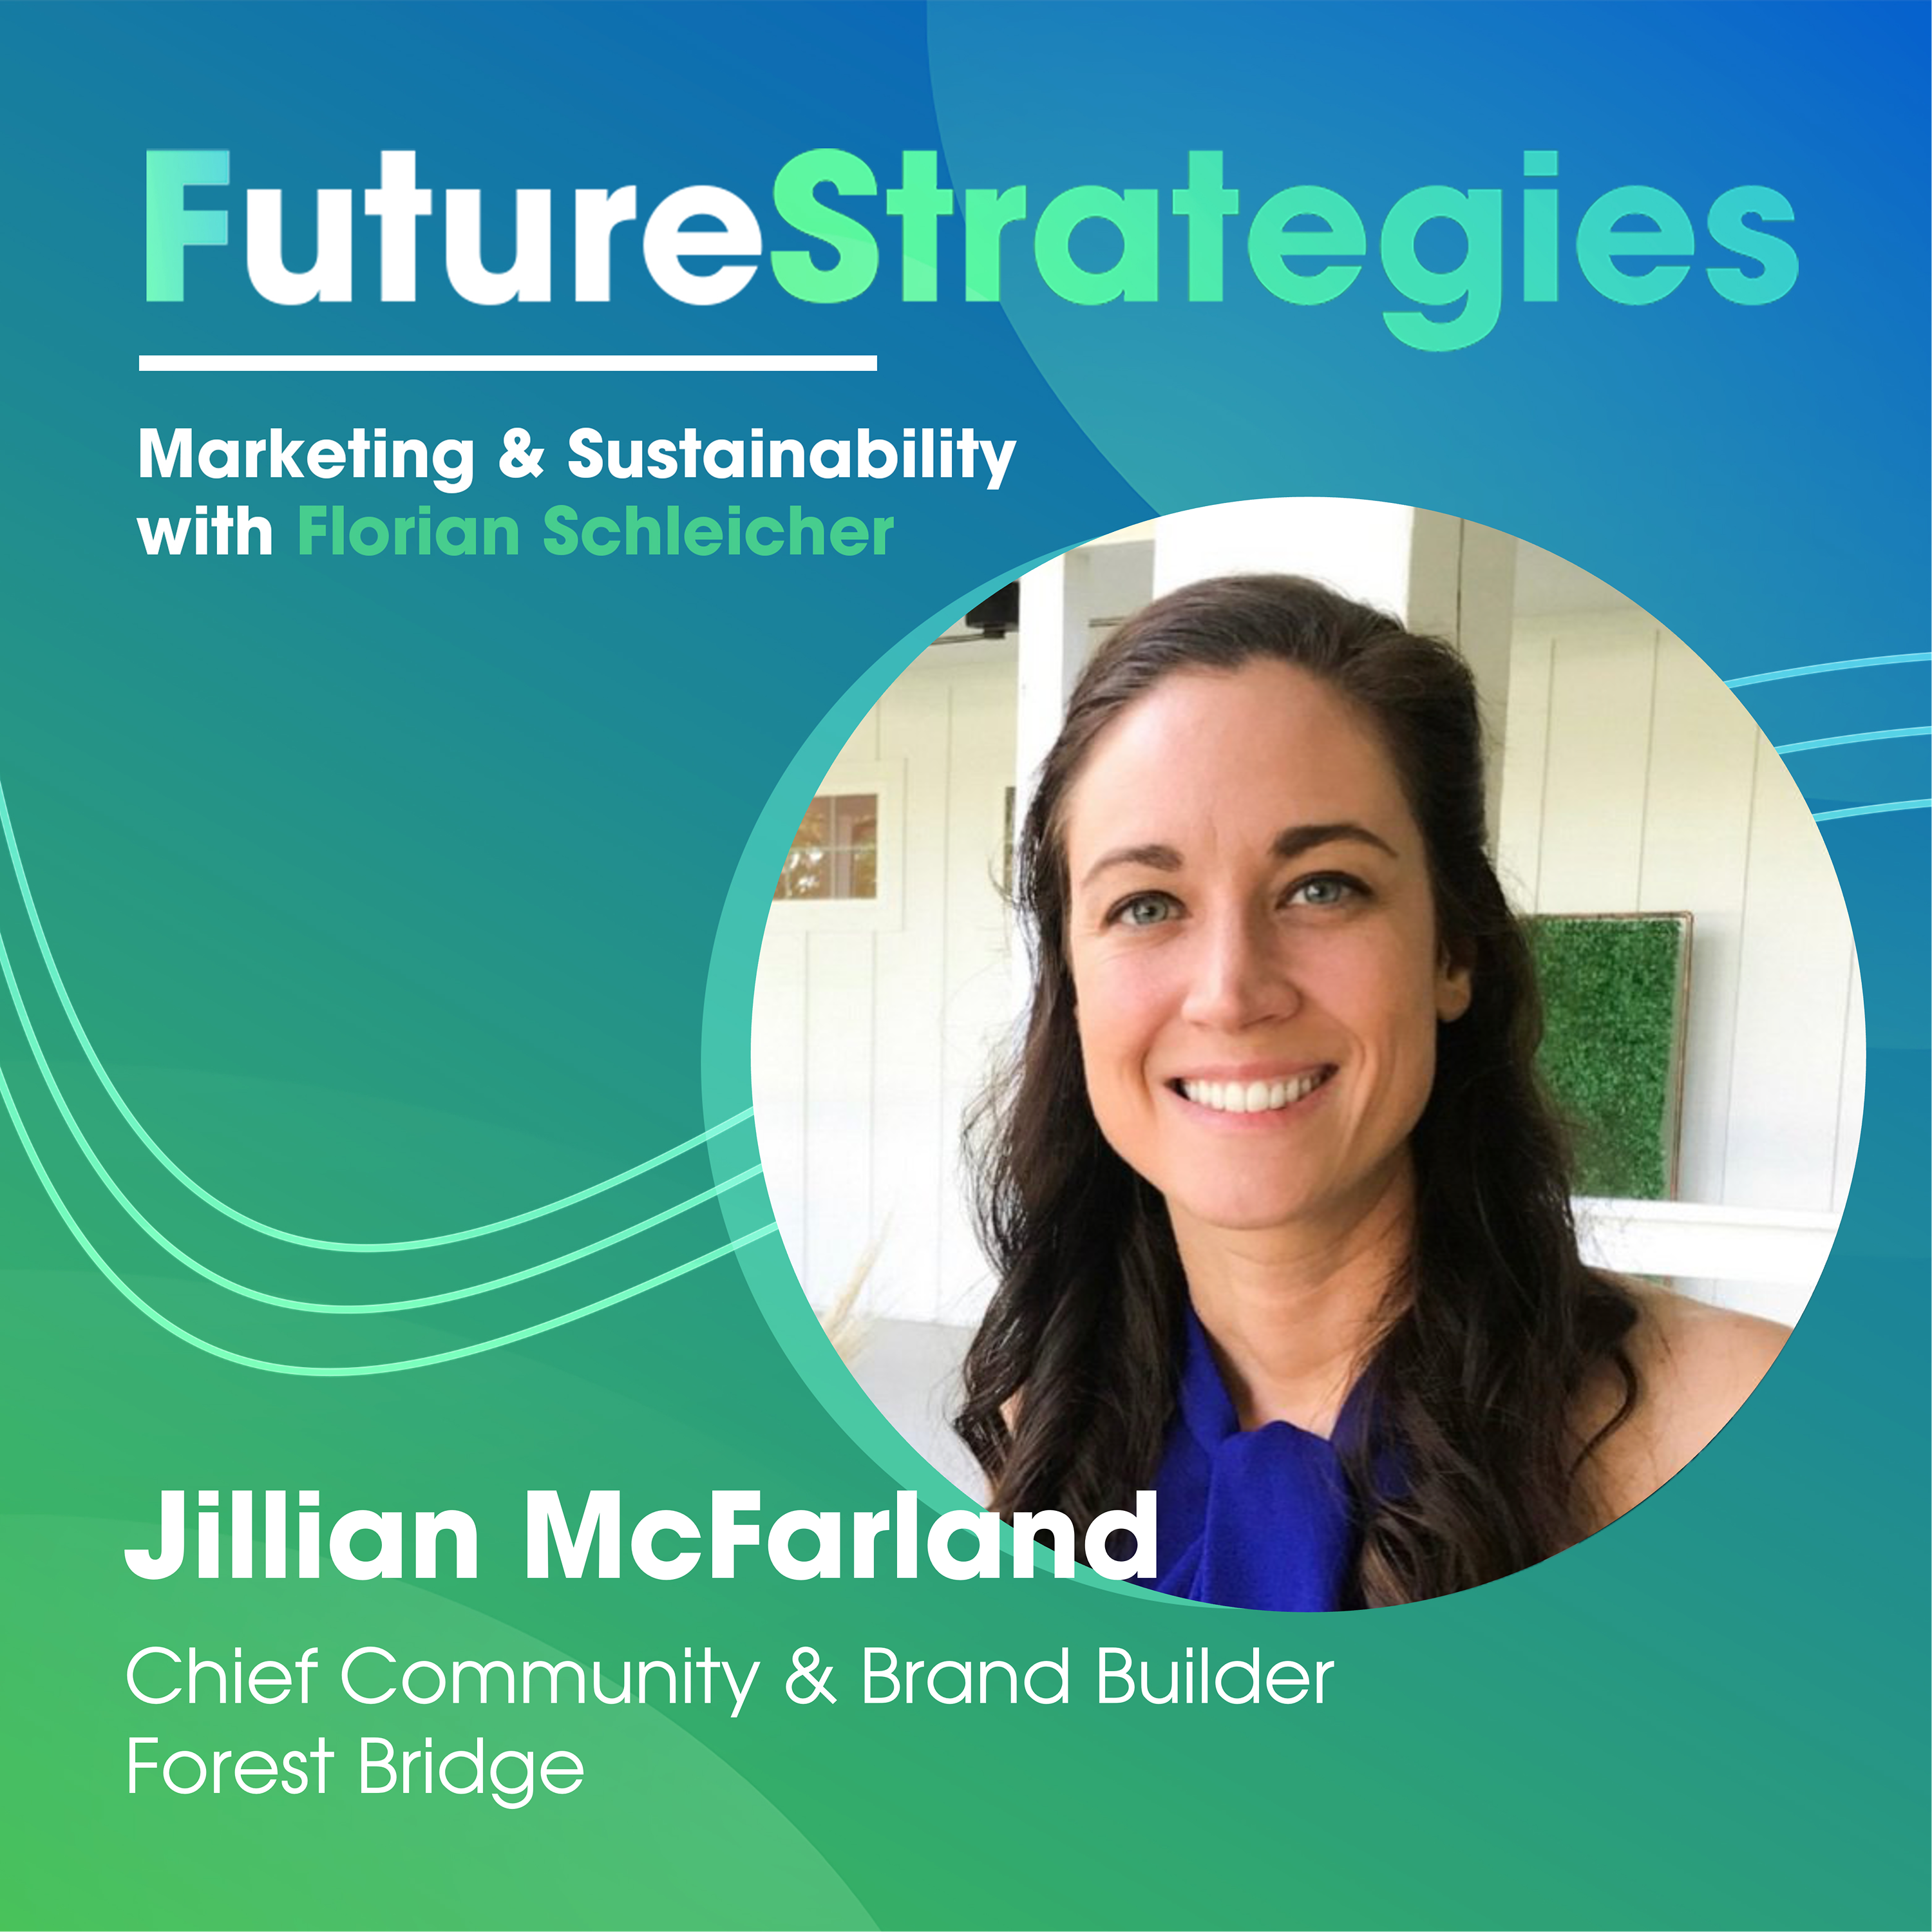 🌳 ”Using marketing to transform the economy” - Jillian McFarland from Forest Bridge about new ways of green advertising